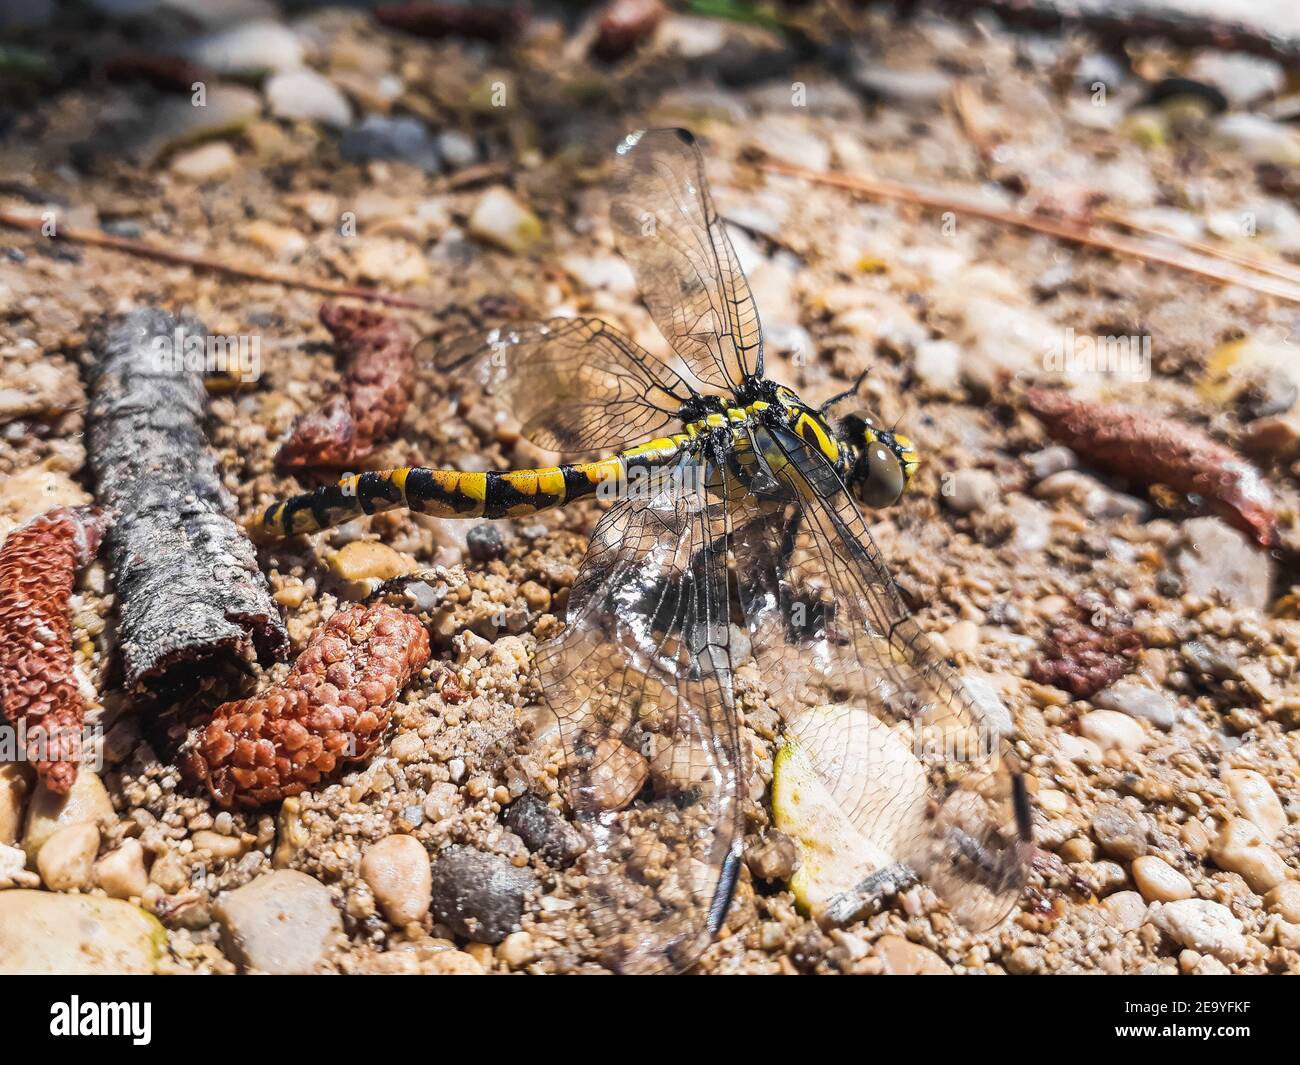 Atrigrated dragonfly -Gomphus simillimus- perched on the bank of a stream in a Mediterranean area. Stock Photo